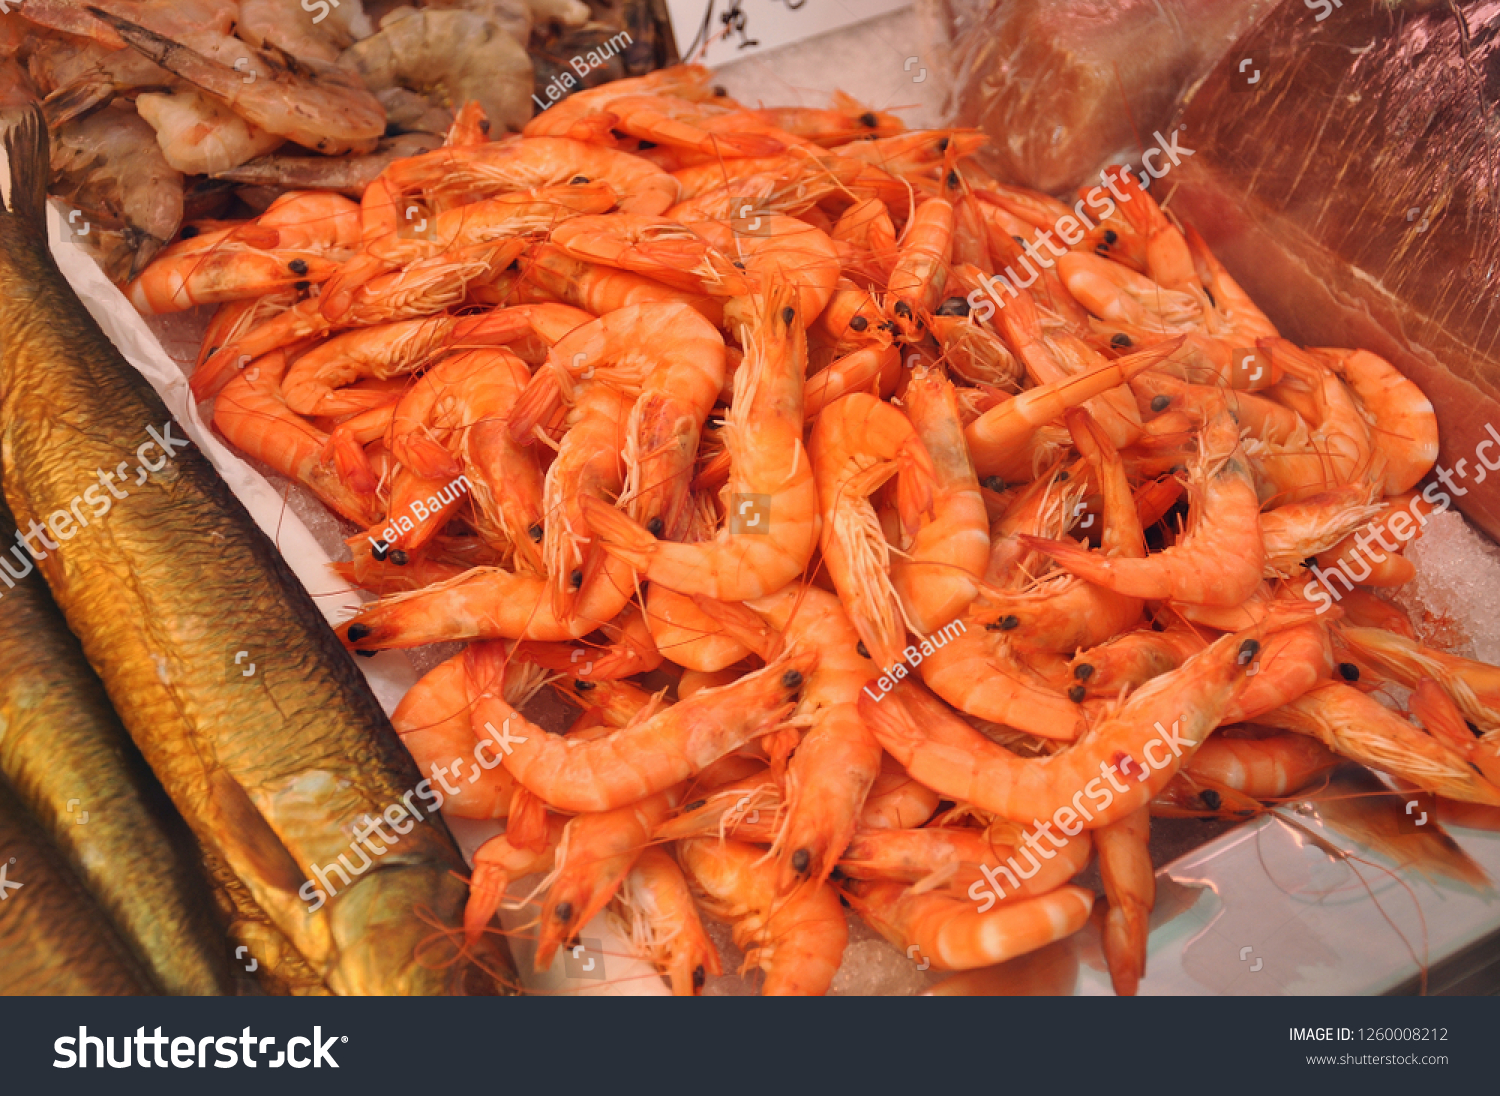 Shrimps at the market stall #1260008212